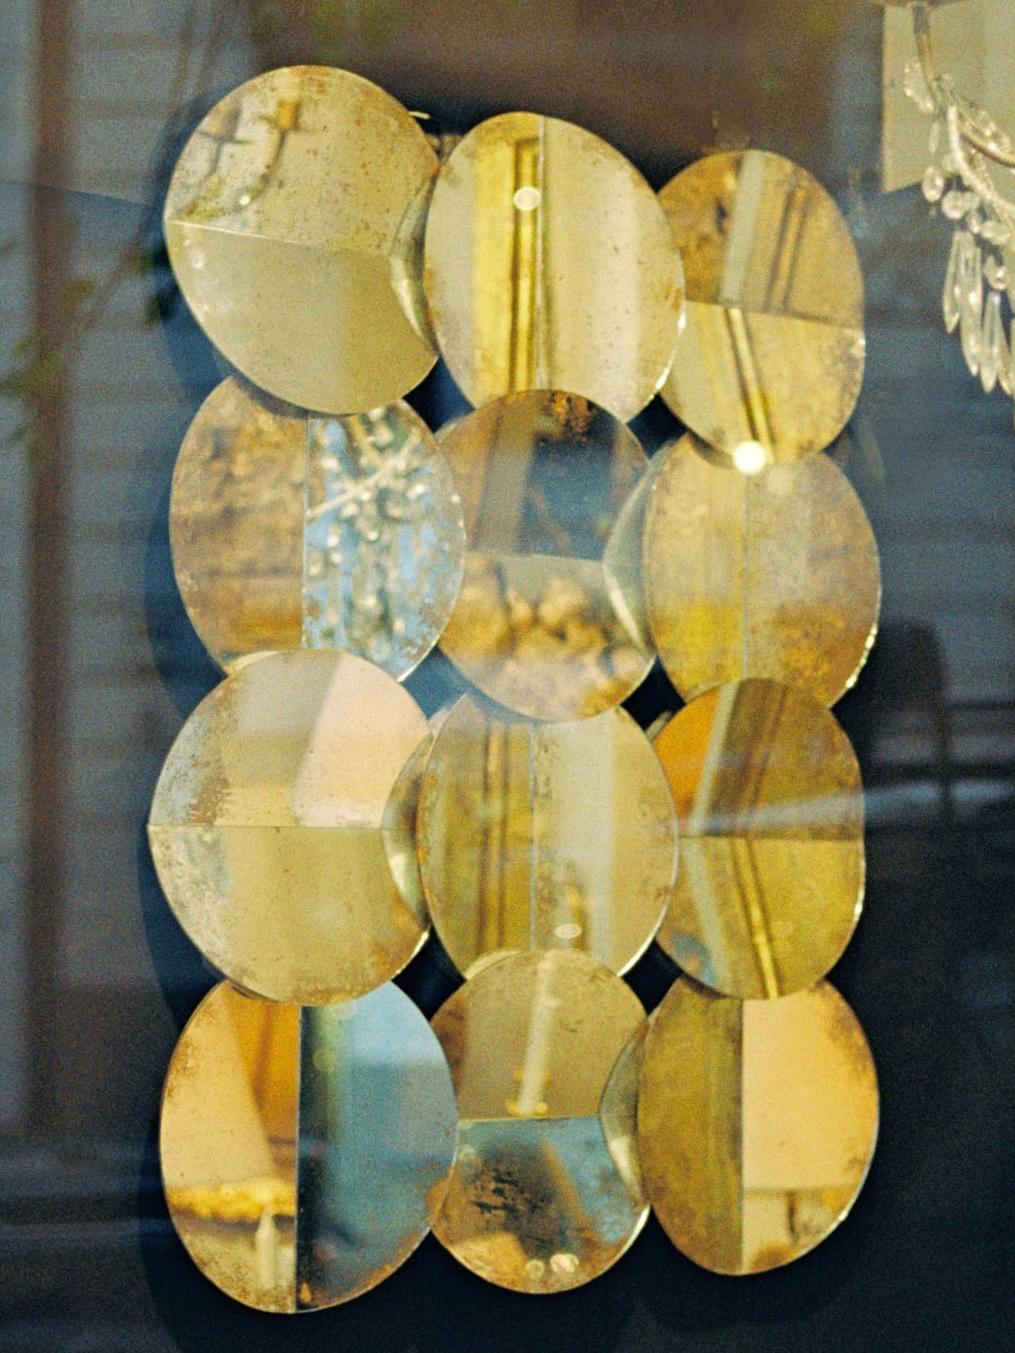 German Contemporary Wall Sculpture by Cornelia Laufer 'Wall of Circles' 2018